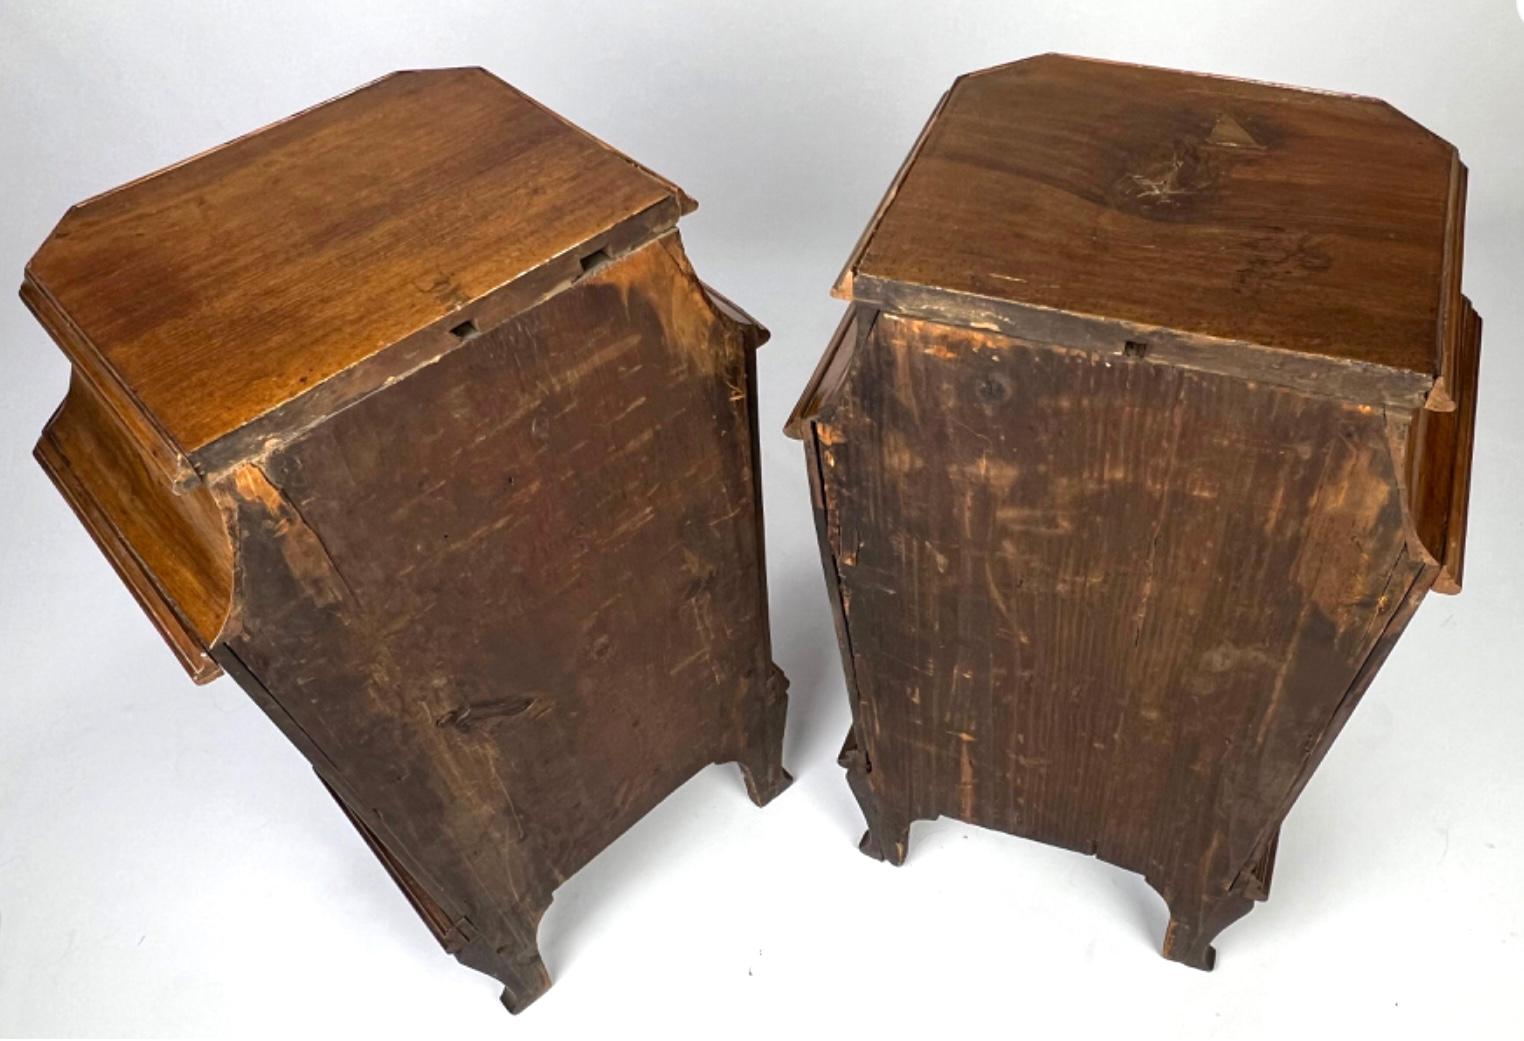 Pair of 19th century Italian bedside tables - night stands. Tables feature a concave top with drawer above inverted tapering case with with three drawers, cabriole legs with pad feet. Venetian style with a wonderful warm mellow patina. Can be used